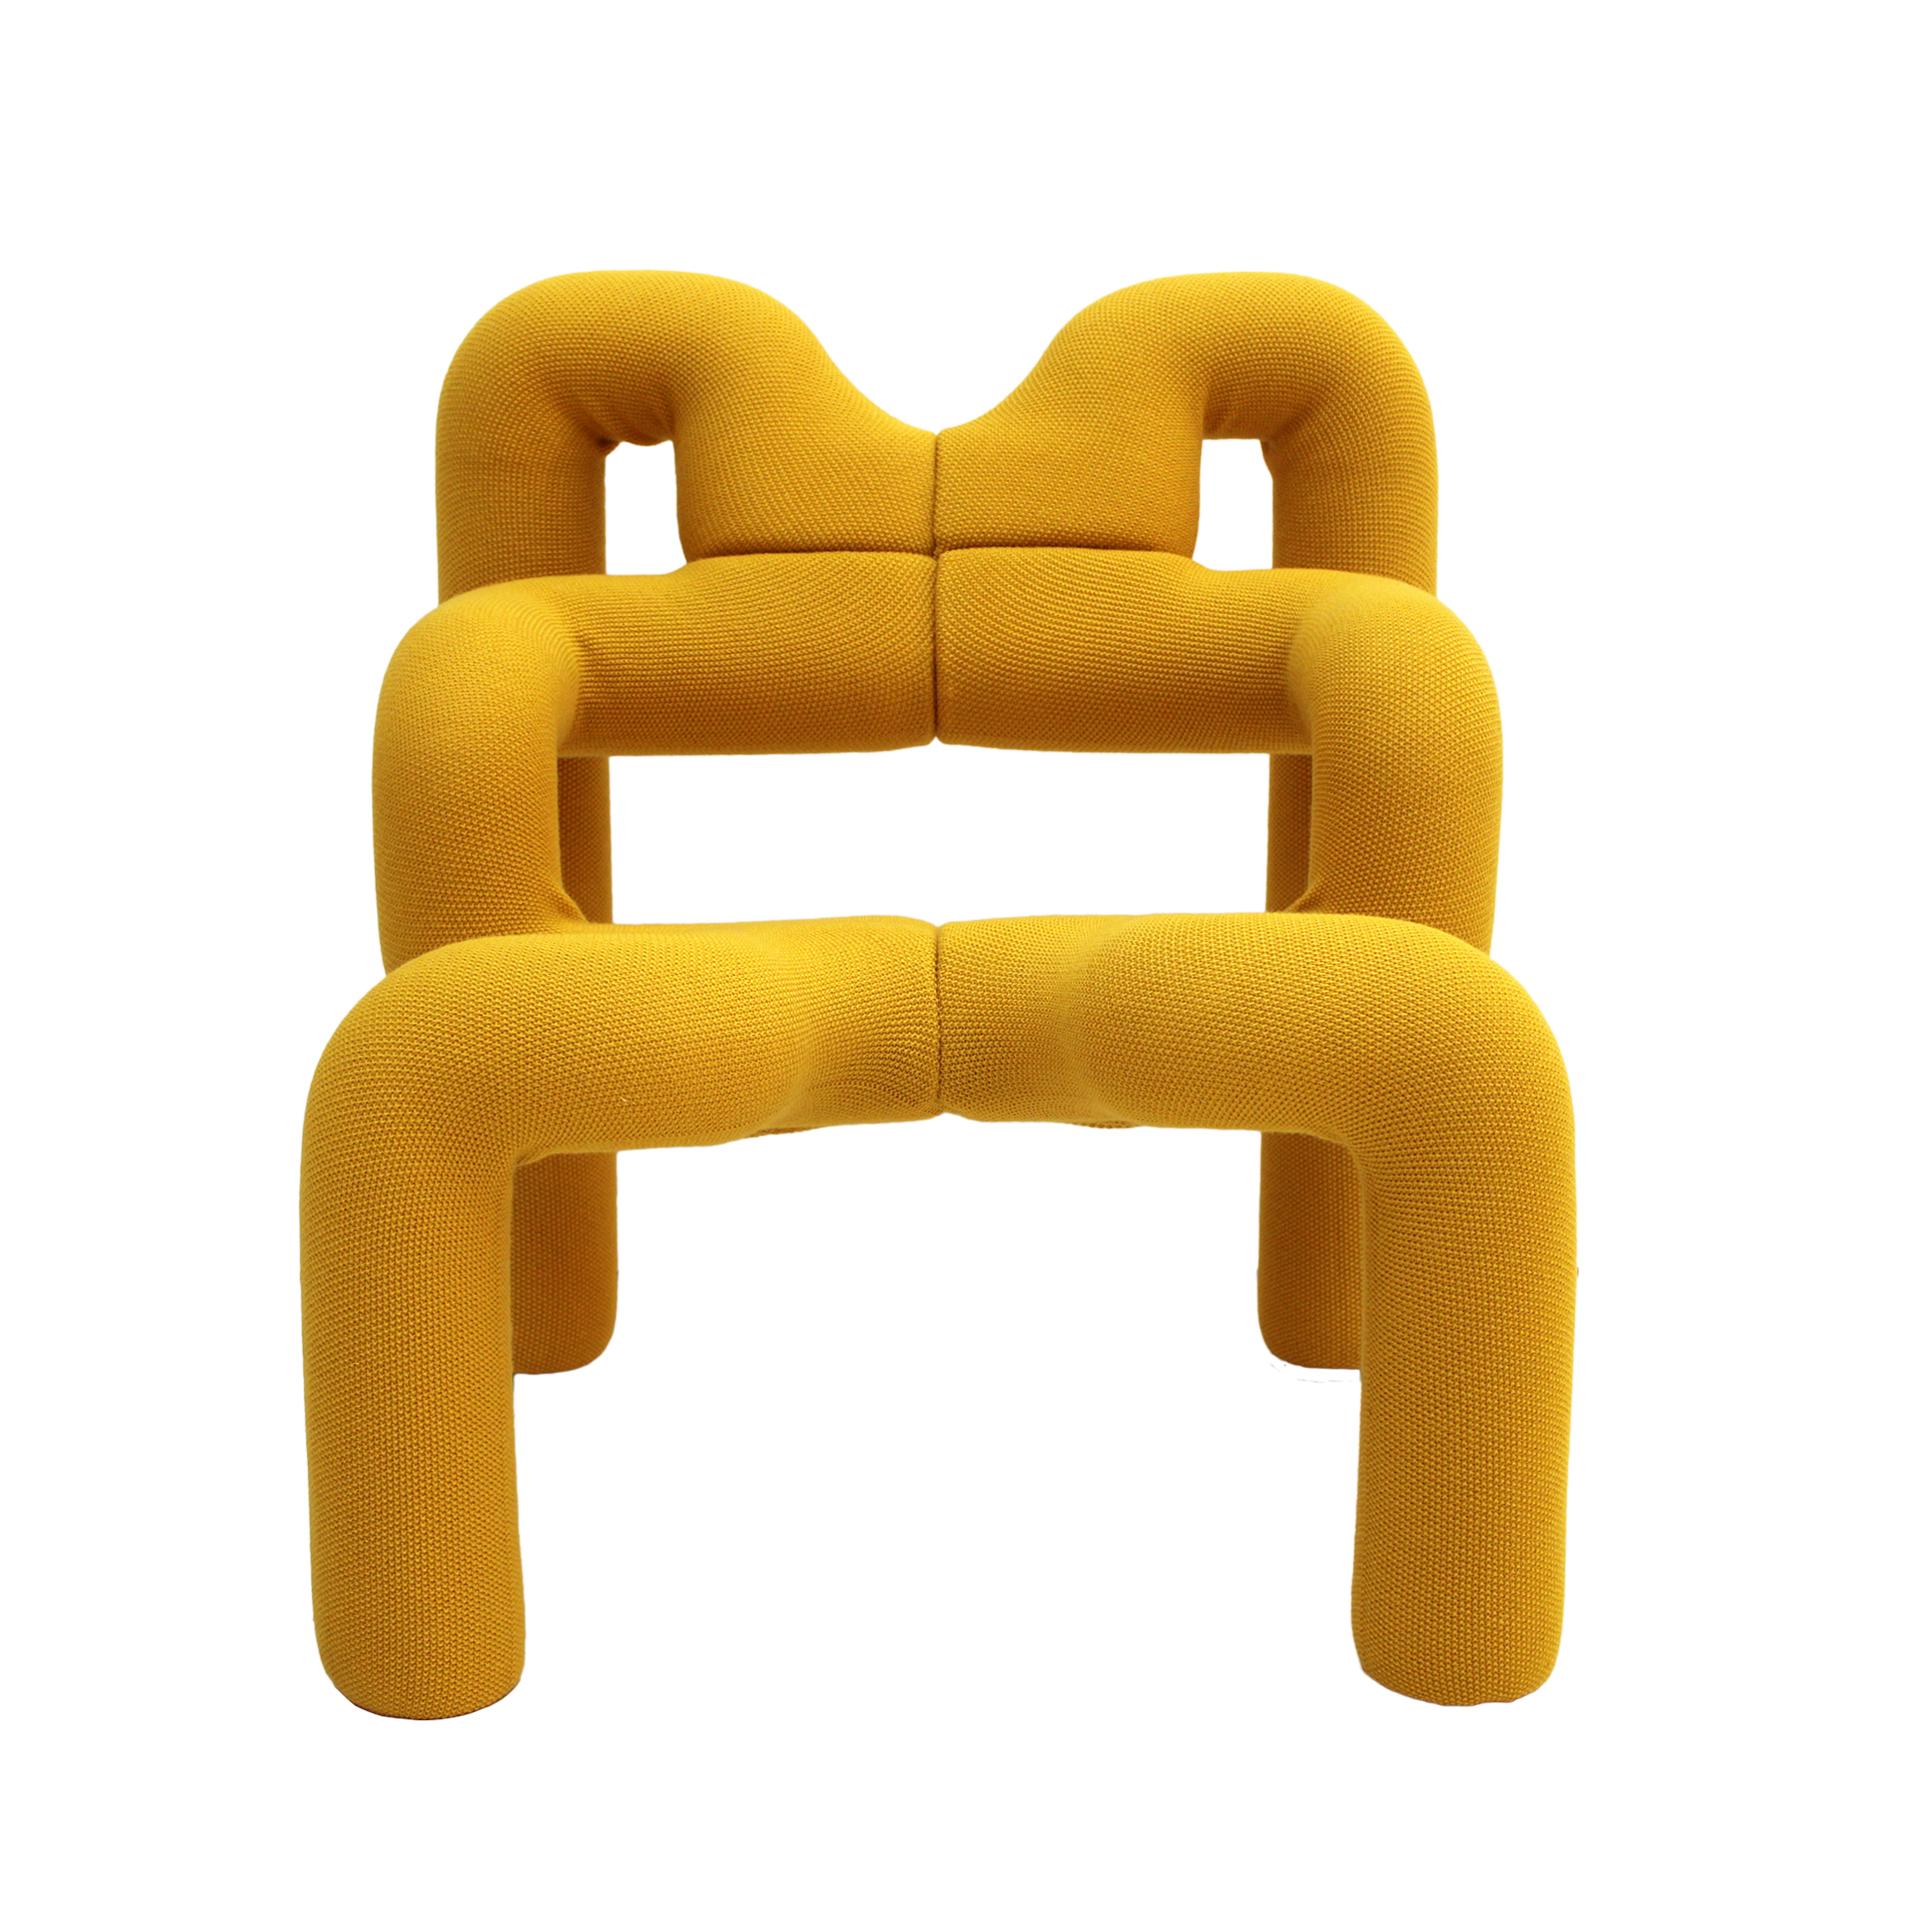 Mod Ekstrem armchairs designed by Terje Ekstrom. Structure made of steel covered with woolen knit foam, and upholstered with yellow wool fabric.


Every item LA Studio offers is checked by our team of 10 craftsmen in our in-house workshop. Special